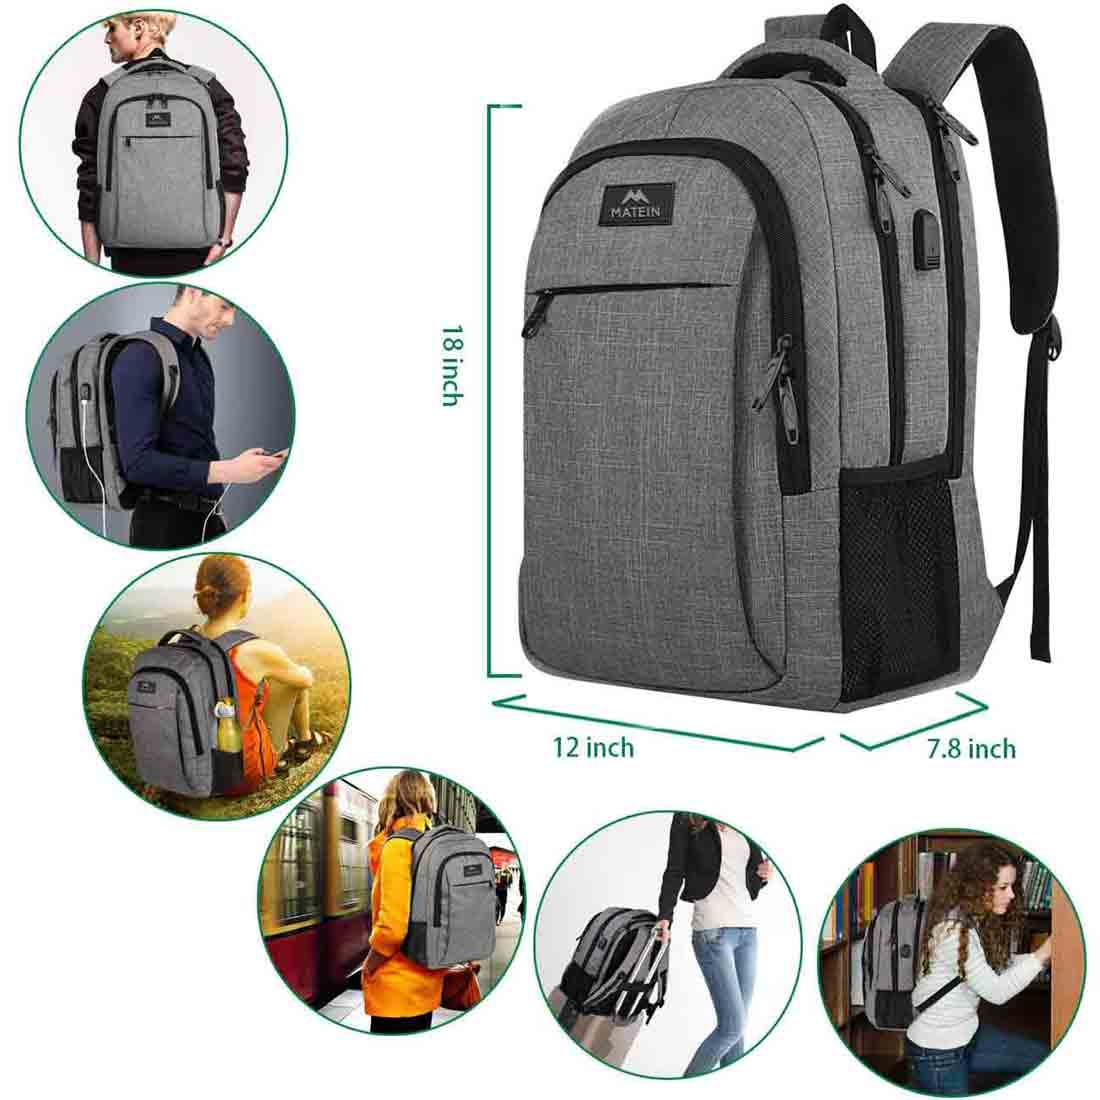 Matein Mlassic Travel Gray Laptop Backpack - travel laptop backpack